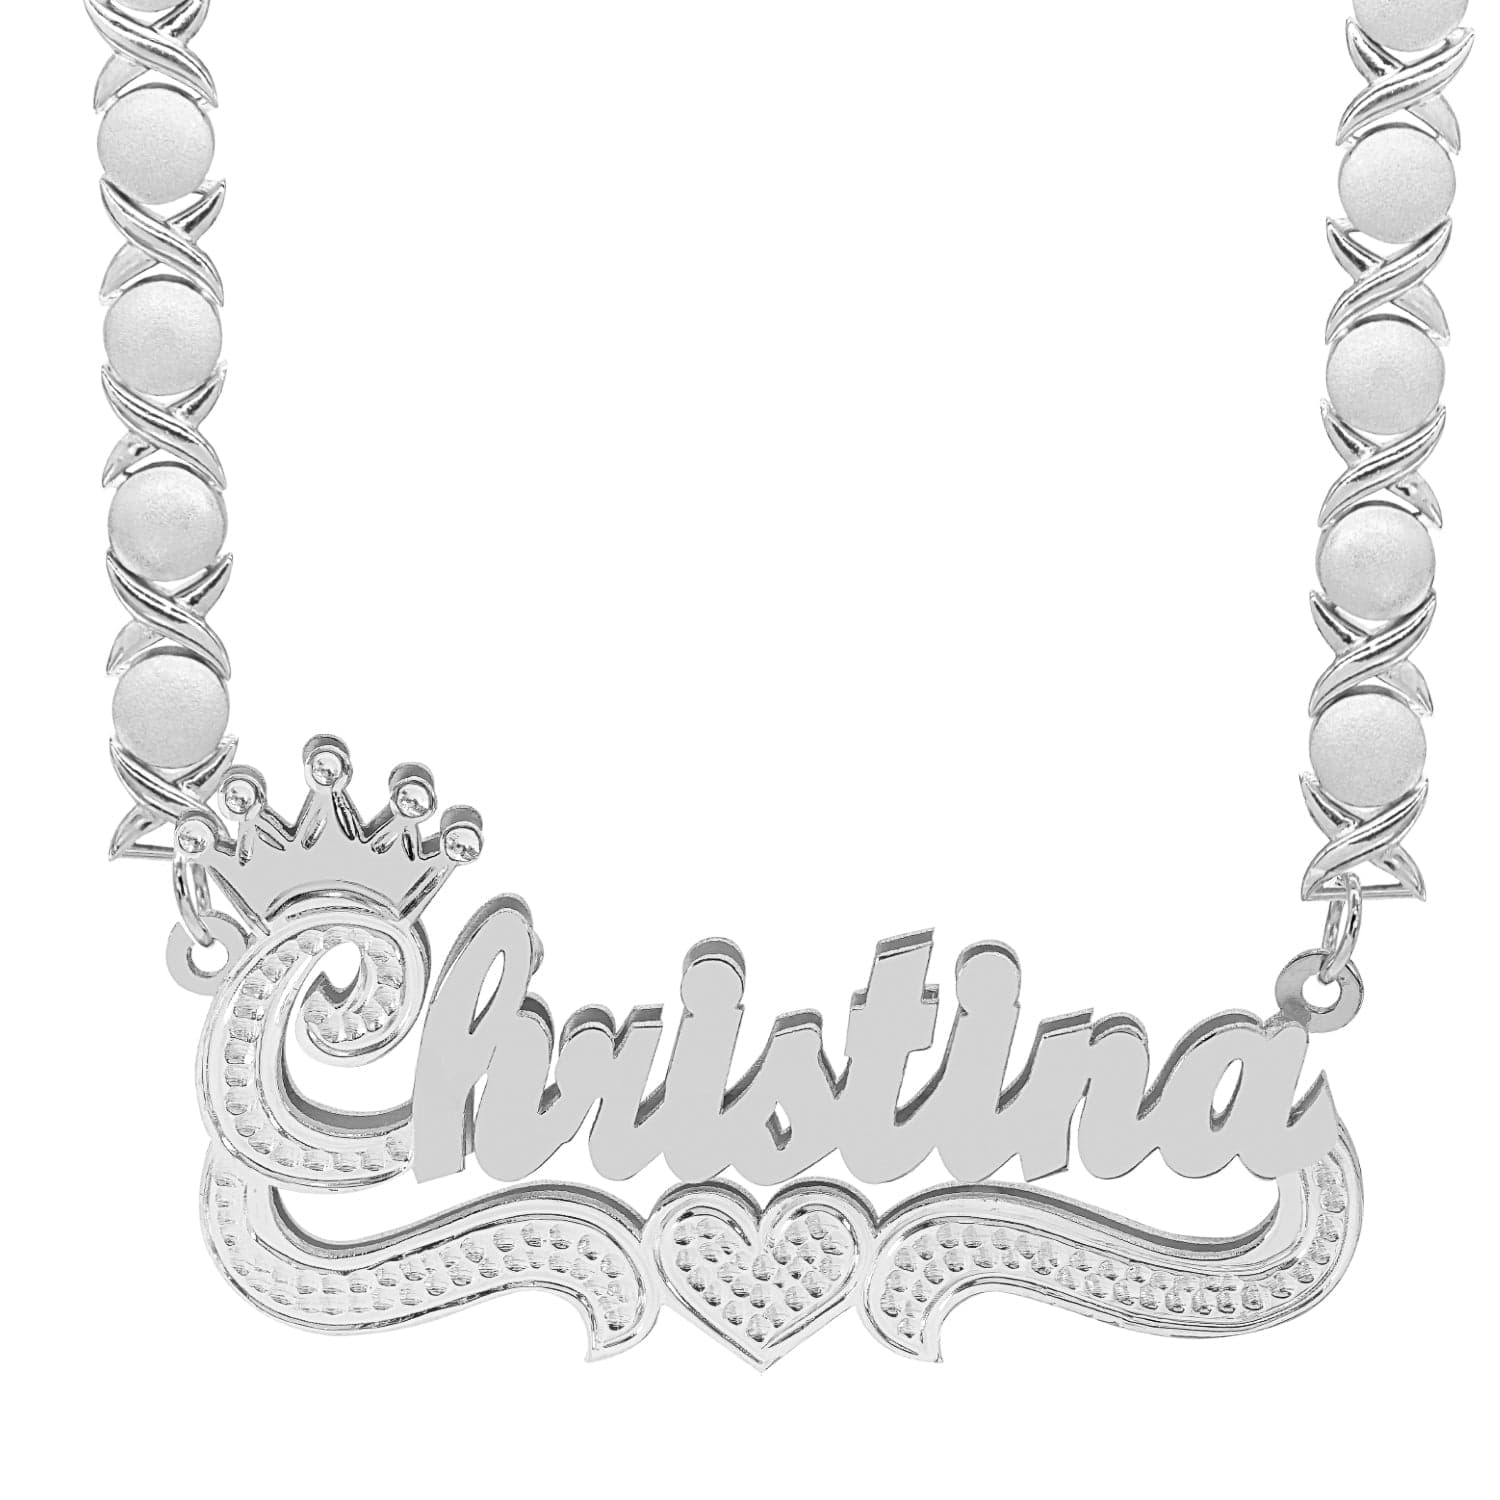 Two-Tone Sterling Silver / Rhodium Xoxo Chain Double Plated Name Necklace "Christina" with Rhodium Xoxo chain